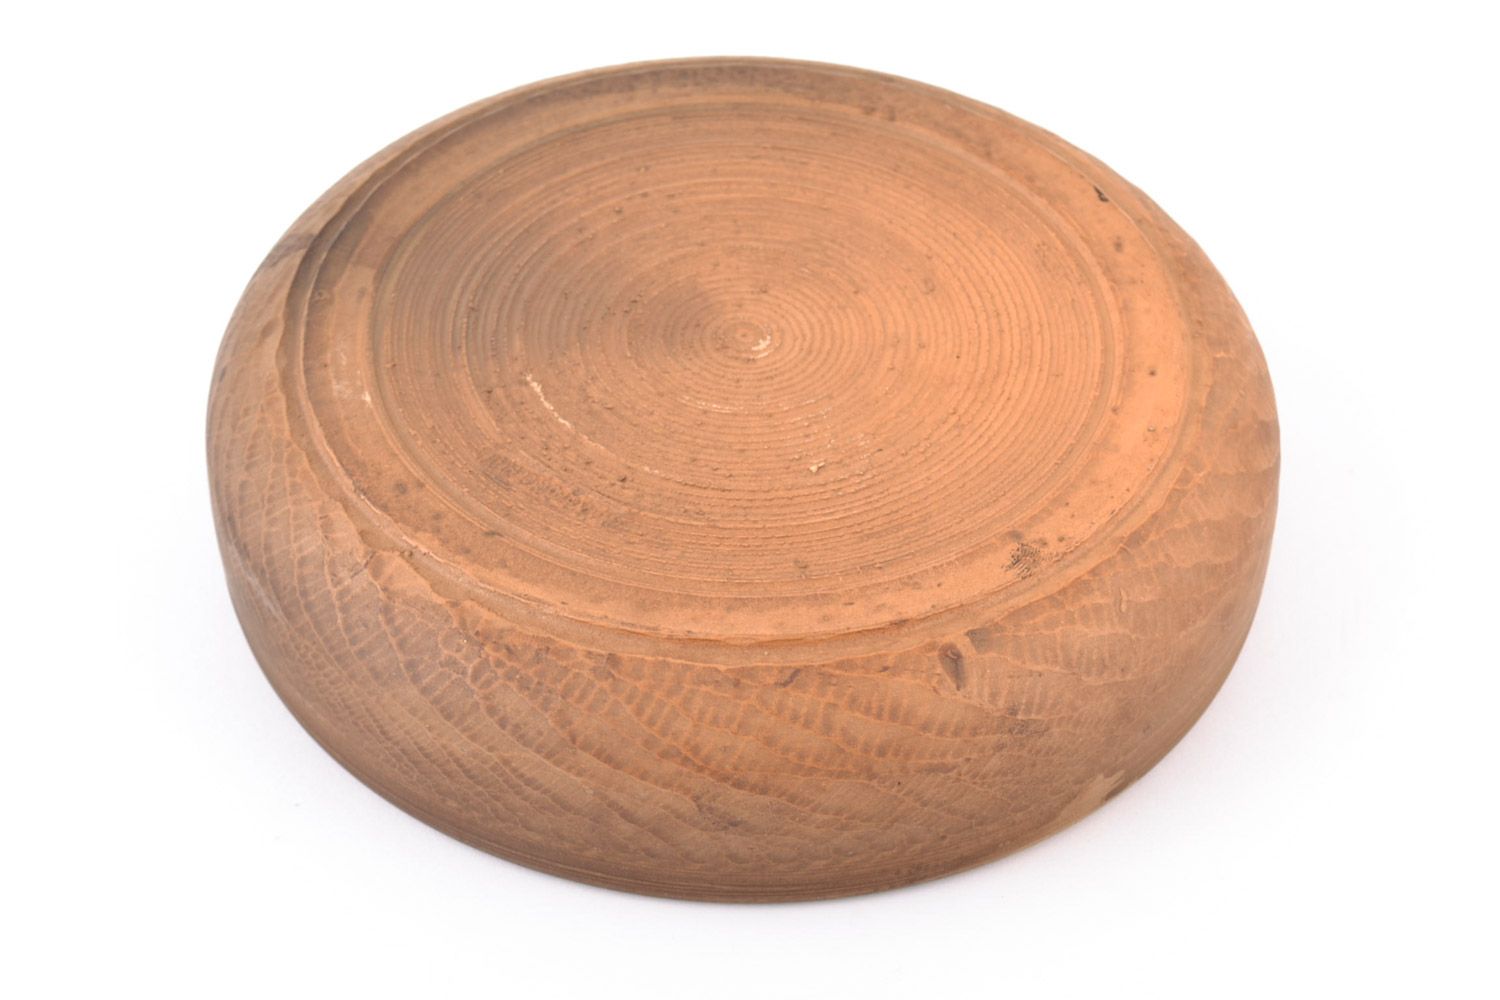 7 6 oz lead-free natural earth clay bowl platter great décor gift 1 lb photo 4